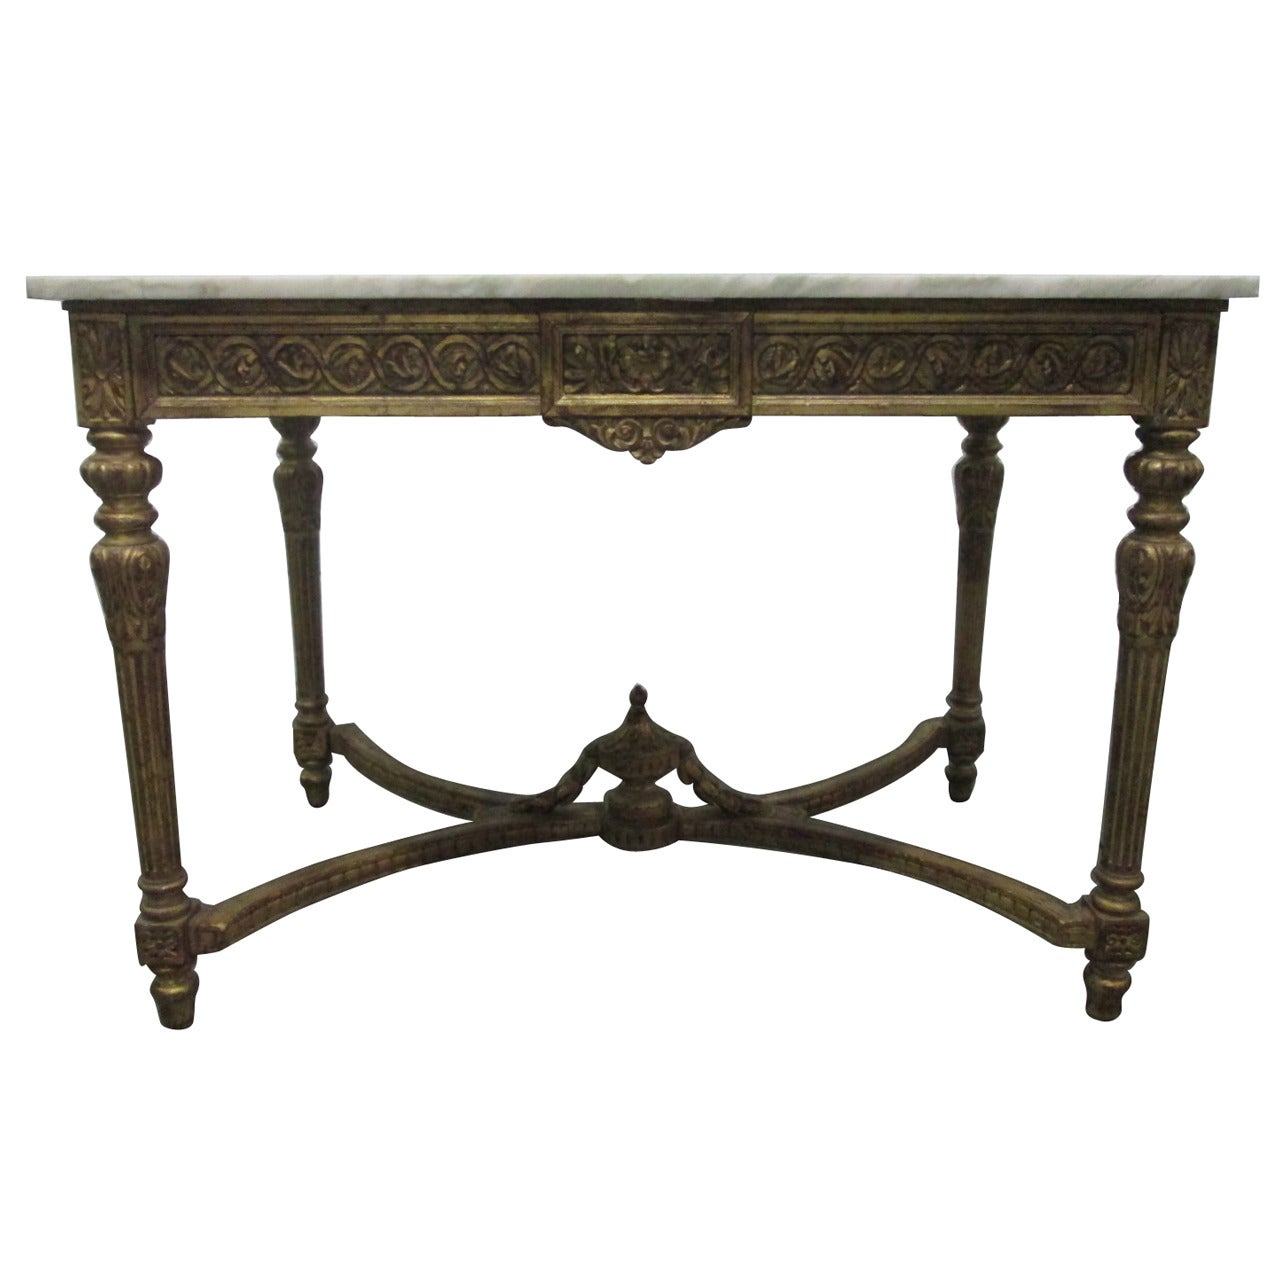 19th century Italian neoclassical gilt carved marble-top table.
 